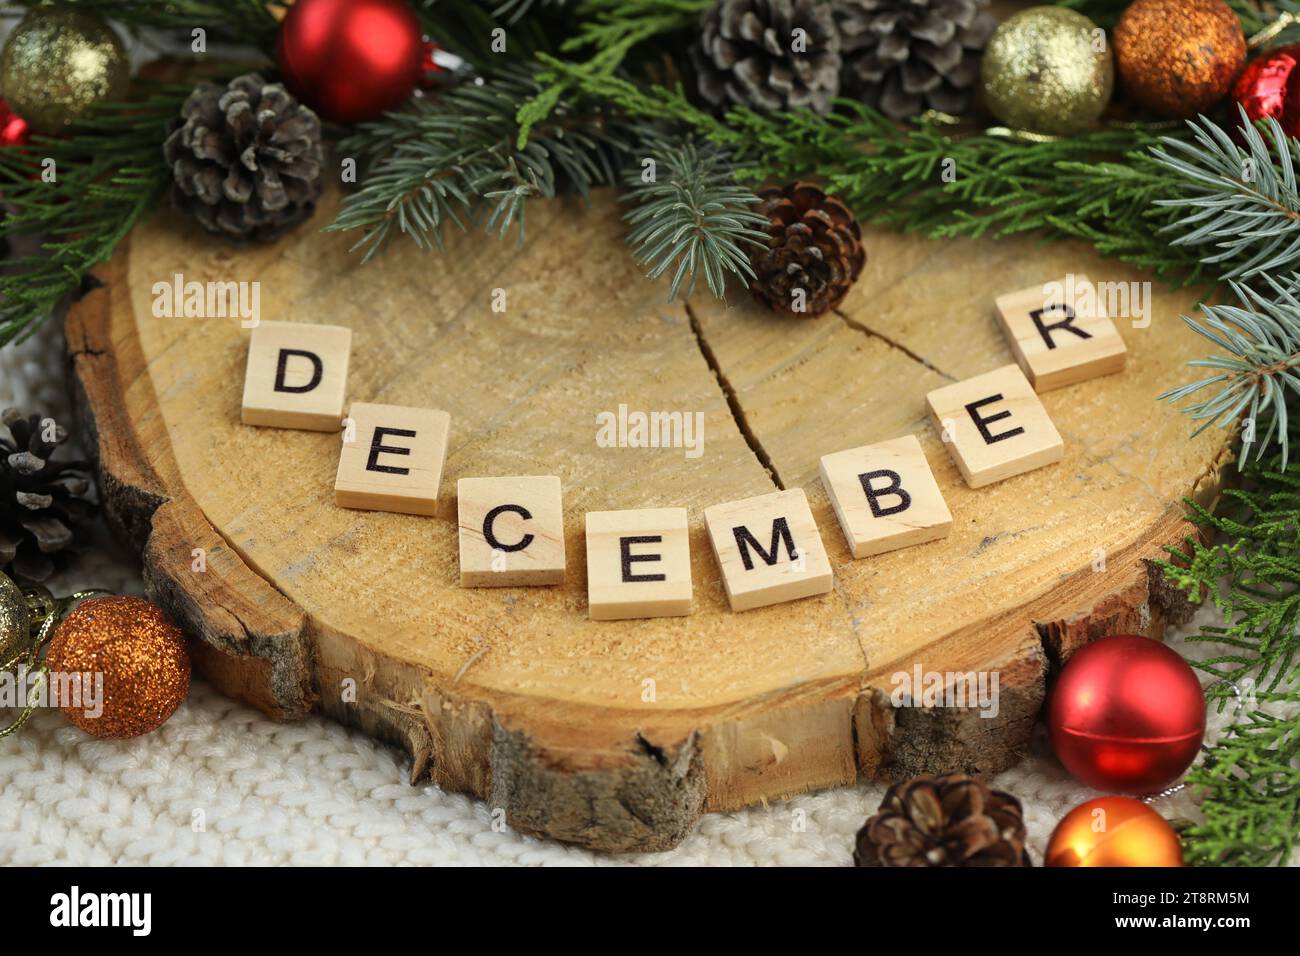 Wooden background with christmas decoration and text Stock Photo